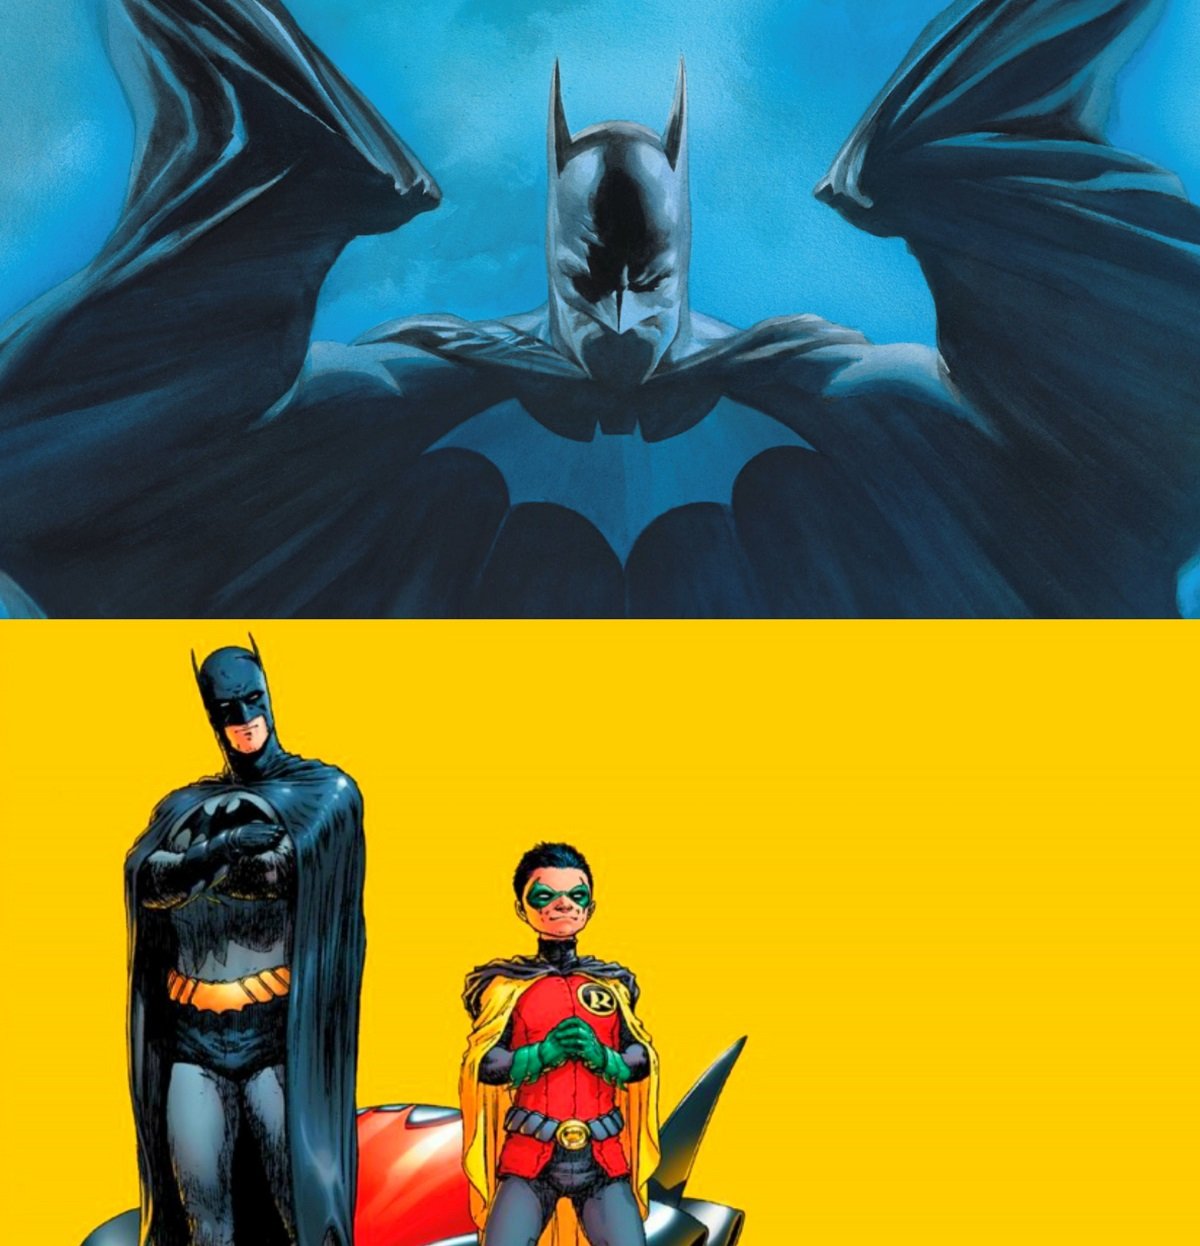 Art by Alex Ross and Frank Quitely from Grant Morrison's celebrated 2000s run on Batman. 